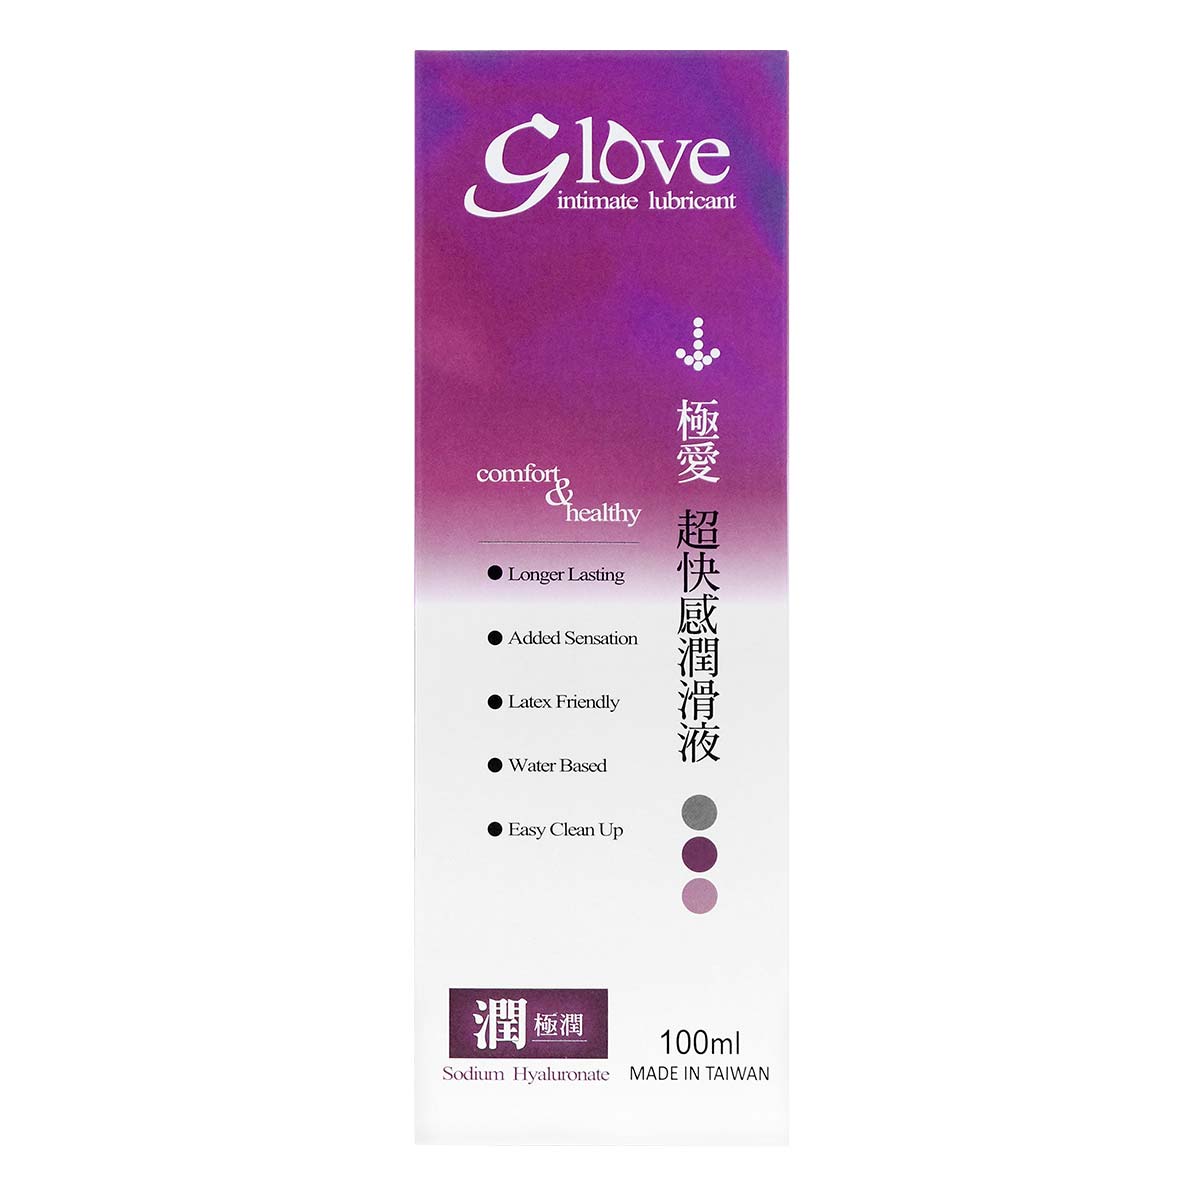 G Love intimate lubricant [Sodium Hyaluronate] 100ml Water-based Lubricant-p_2